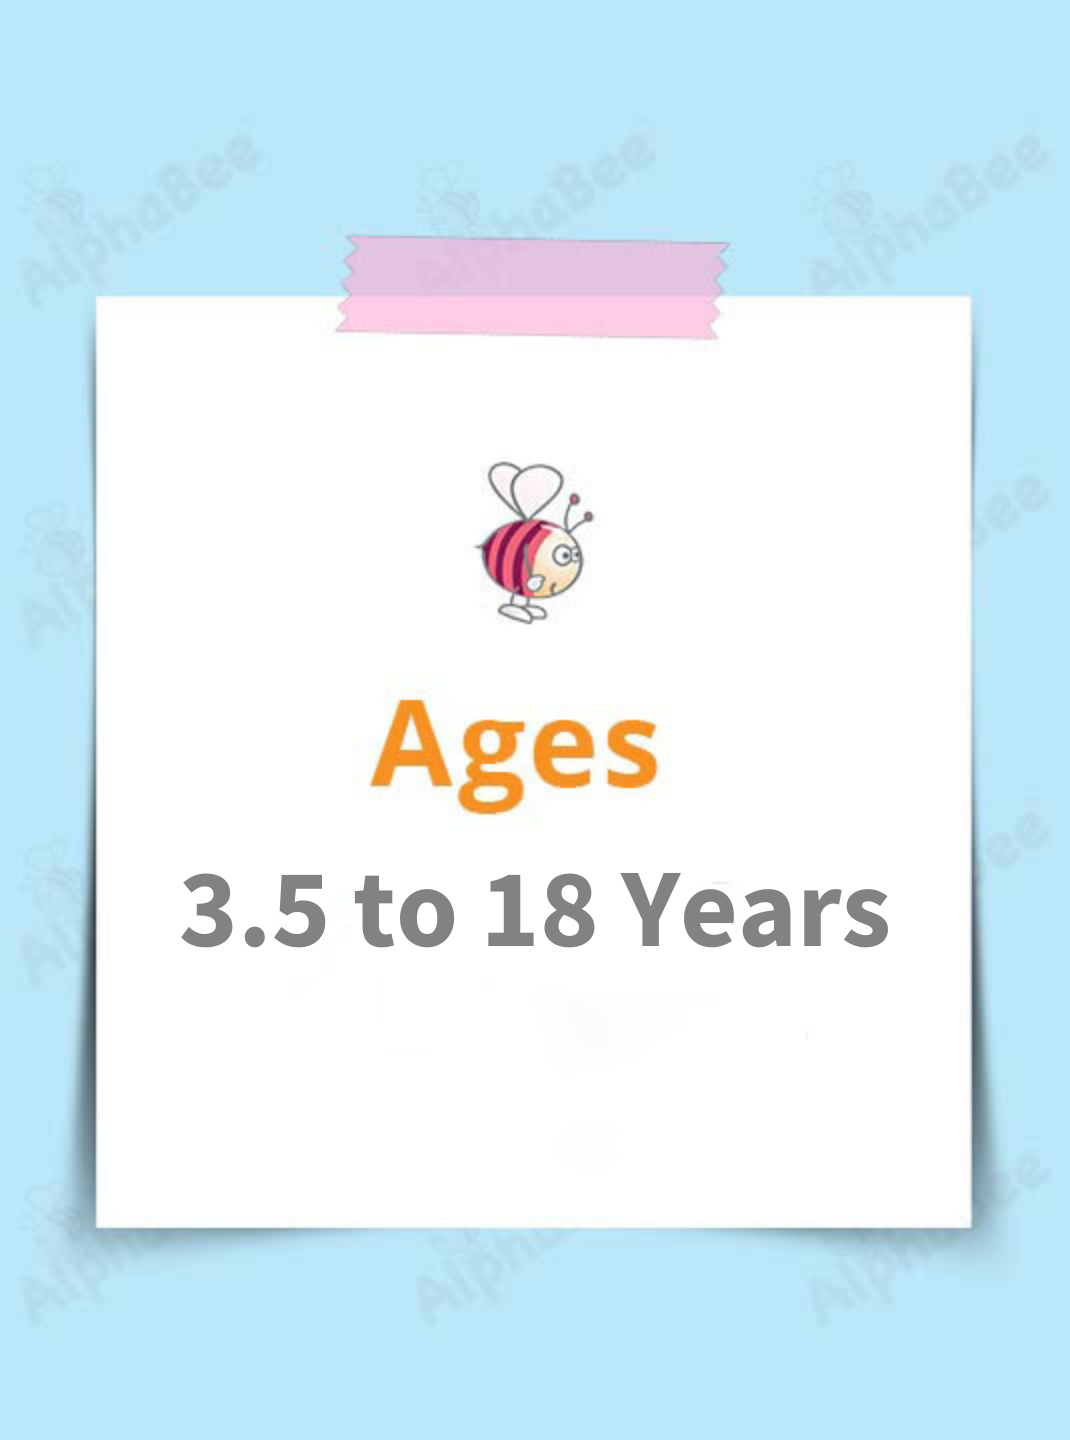 Ages 3.5 to 18 Years